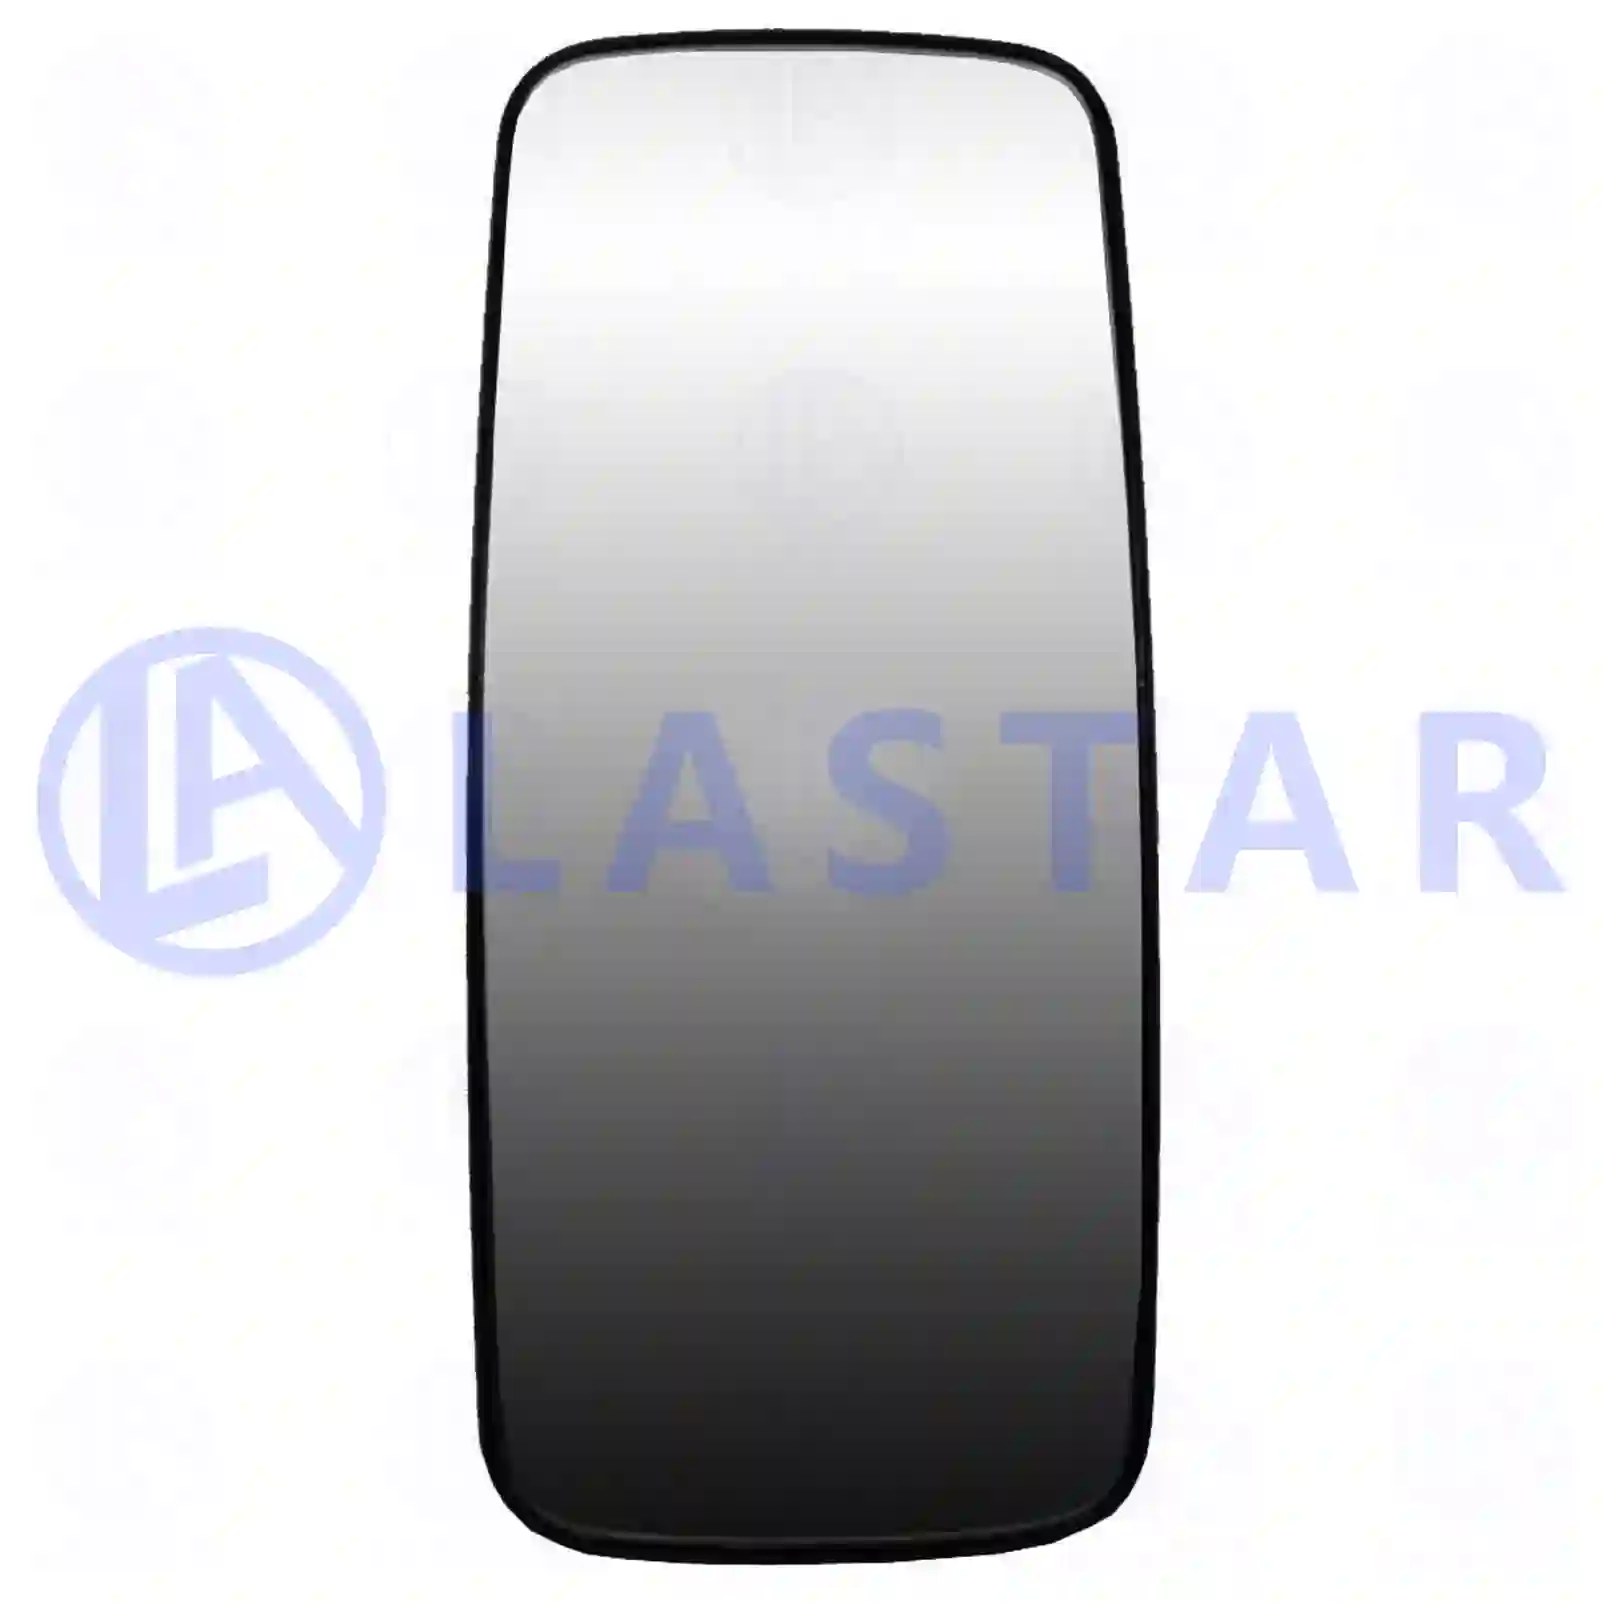 Mirror glass, main mirror, heated, 77718880, 0018113433, 0018117333, 0018117433, ZG60993-0008 ||  77718880 Lastar Spare Part | Truck Spare Parts, Auotomotive Spare Parts Mirror glass, main mirror, heated, 77718880, 0018113433, 0018117333, 0018117433, ZG60993-0008 ||  77718880 Lastar Spare Part | Truck Spare Parts, Auotomotive Spare Parts